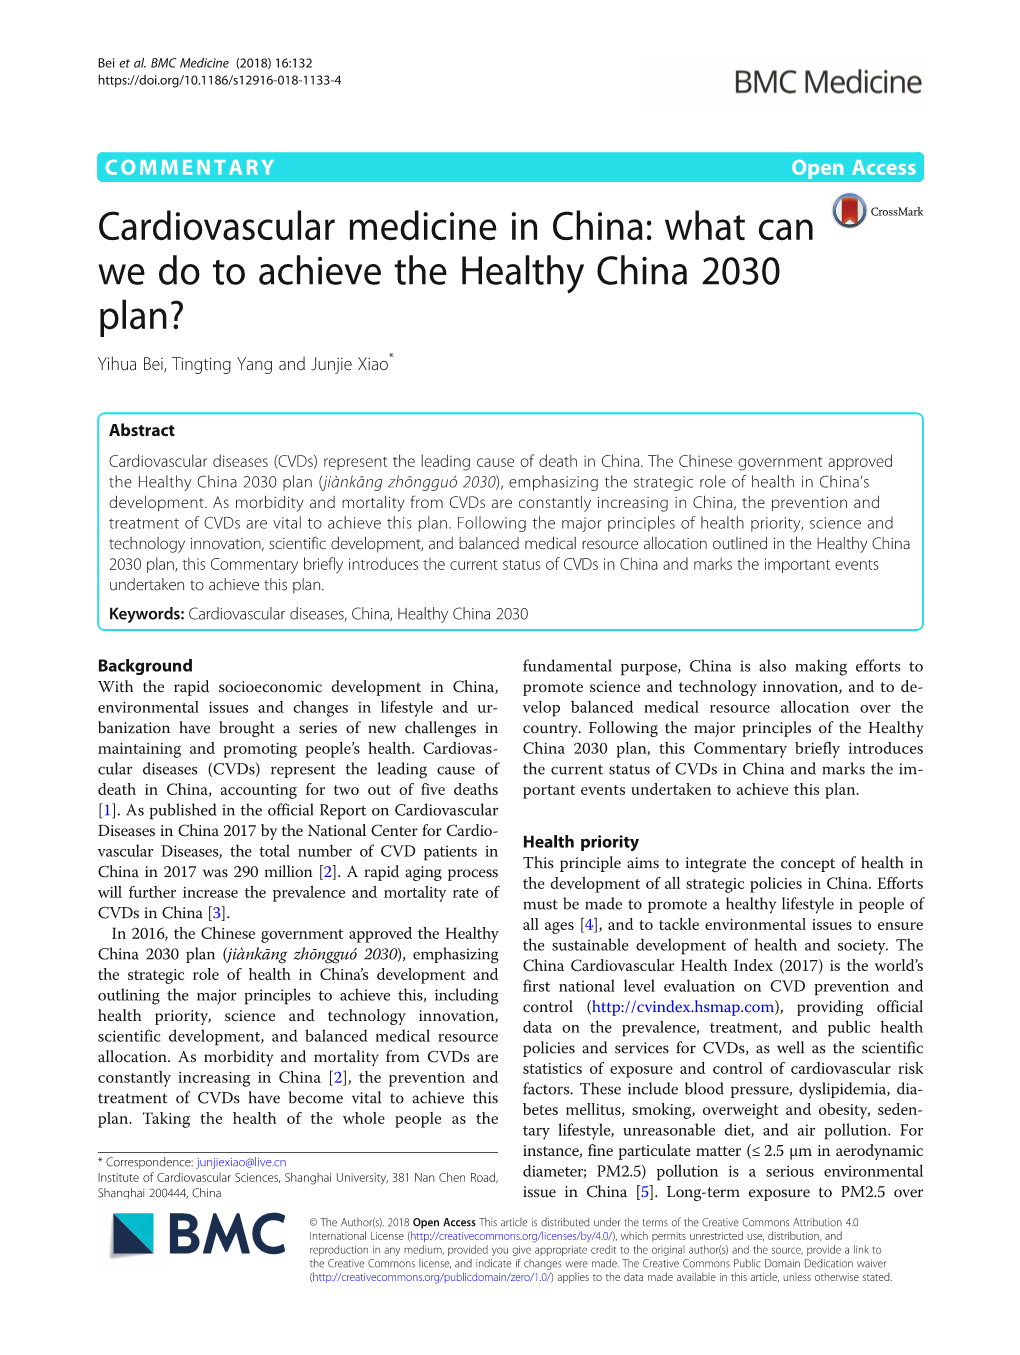 Cardiovascular Medicine in China: What Can We Do to Achieve the Healthy China 2030 Plan? Yihua Bei, Tingting Yang and Junjie Xiao*